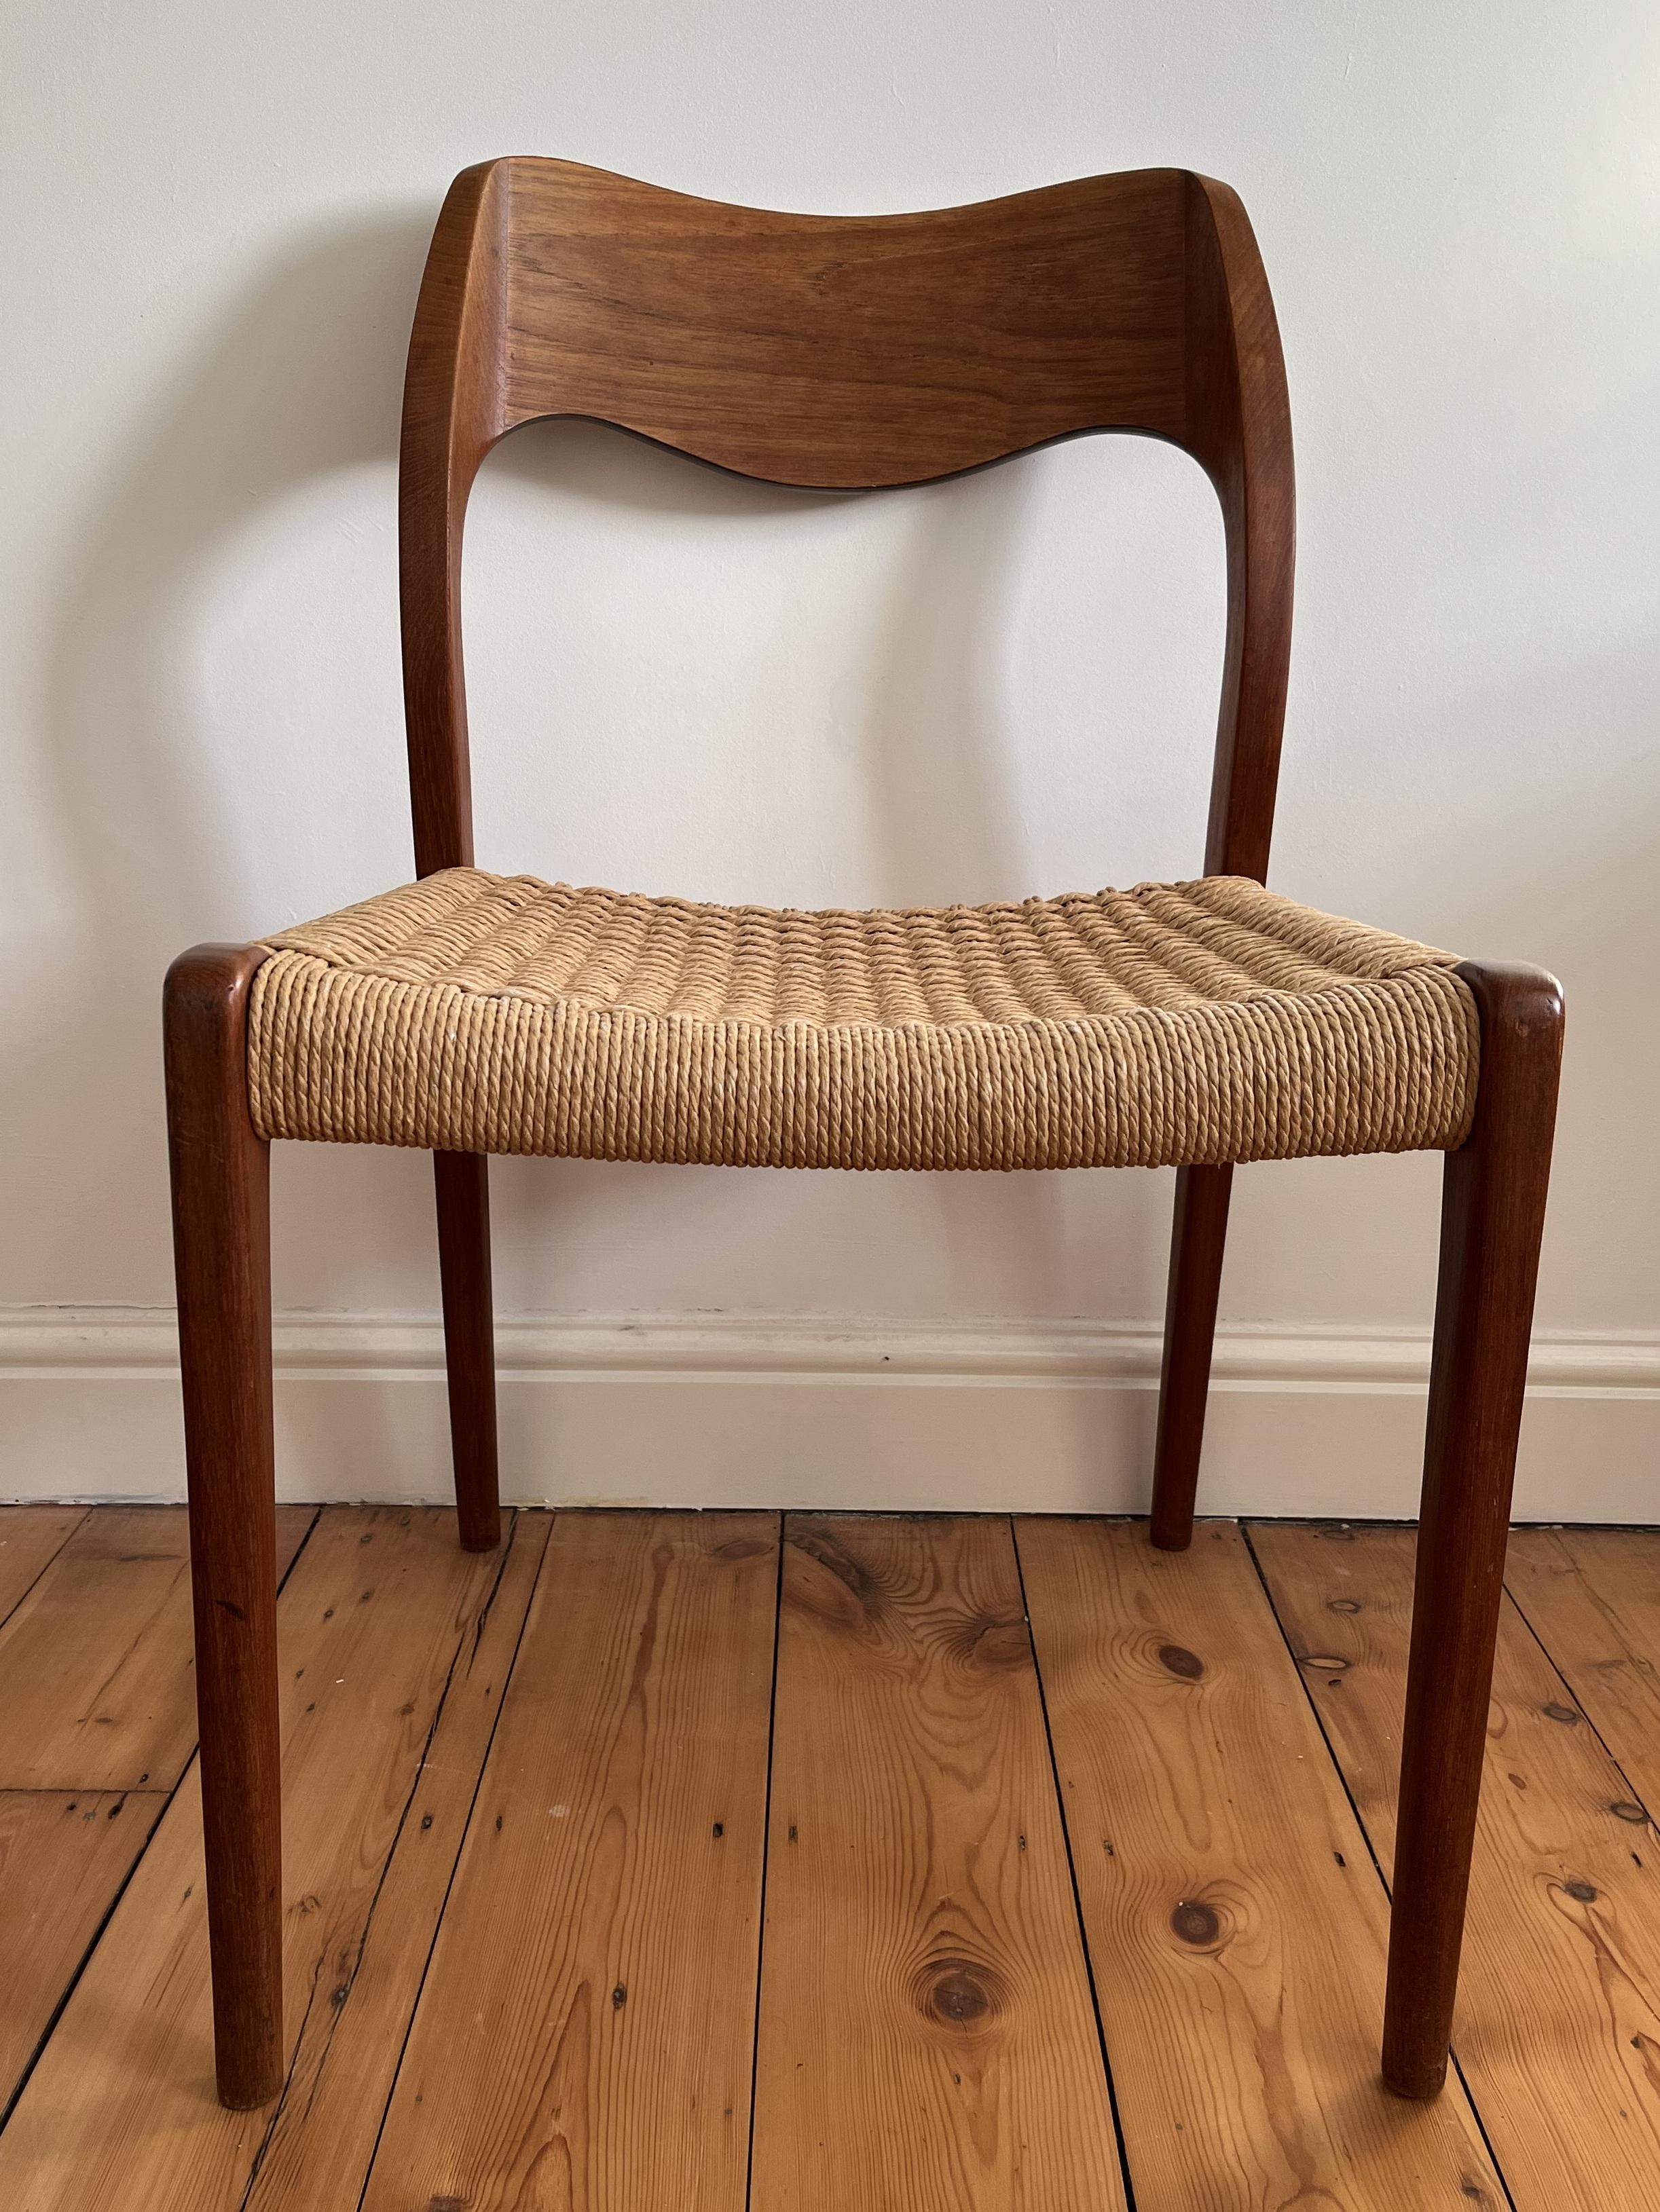 Teak and papercord Niels Moller 71 chair for JL Moller originally designed in 1951.

The chair is in very good original condition. The papercord is all in tact and just shows usual signs of age including some slight opening in places to expose the